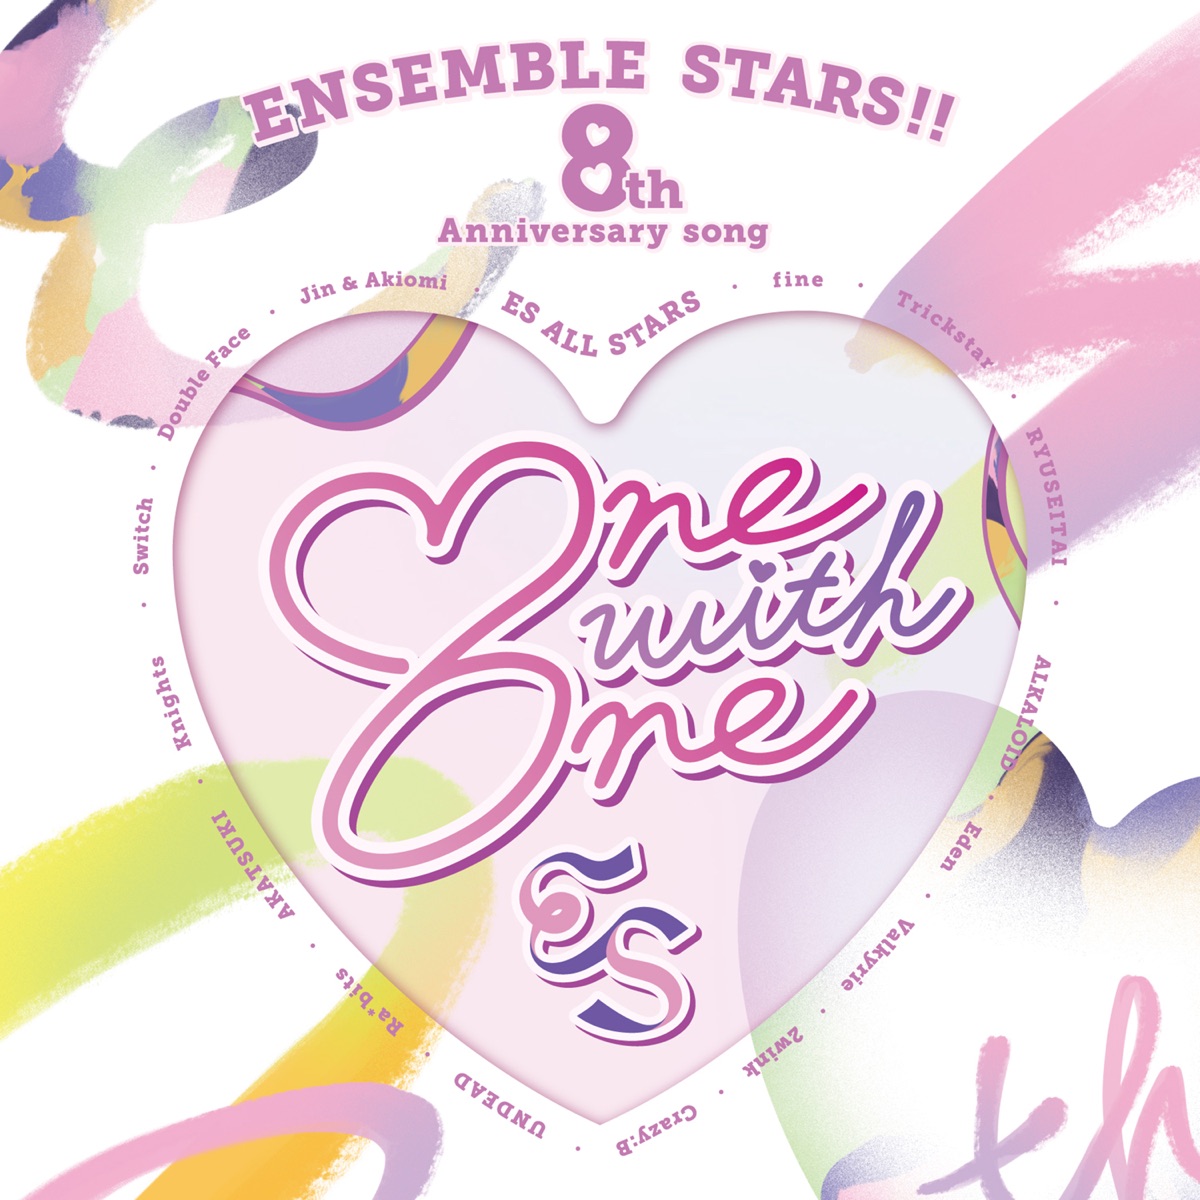 『ES オールスターズ - One with One』収録の『『あんさんぶるスターズ!!』8th Anniversary song「One with One」』ジャケット